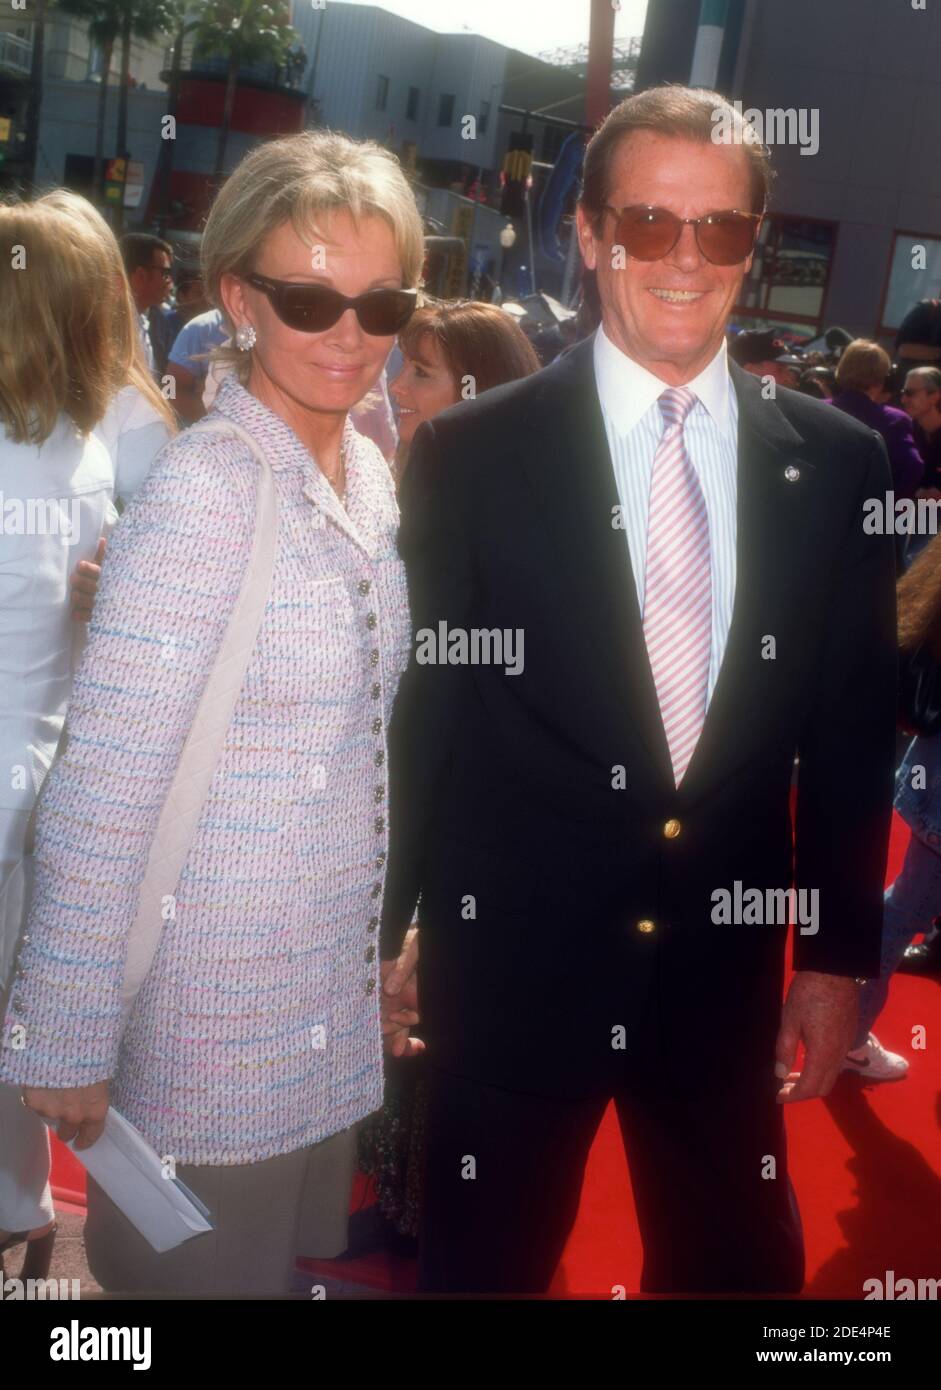 Universal City, California, USA 20th April 1996 Actress Luisa Mattioli and husband actor Roger Moore attend Universal Pictures' 'The Quest' on April 20, 1996 at Cineplex Odeon Universal City Cinemas in Universal City, California, USA. Photo by Barry King/Alamy Stock Photo Stock Photo